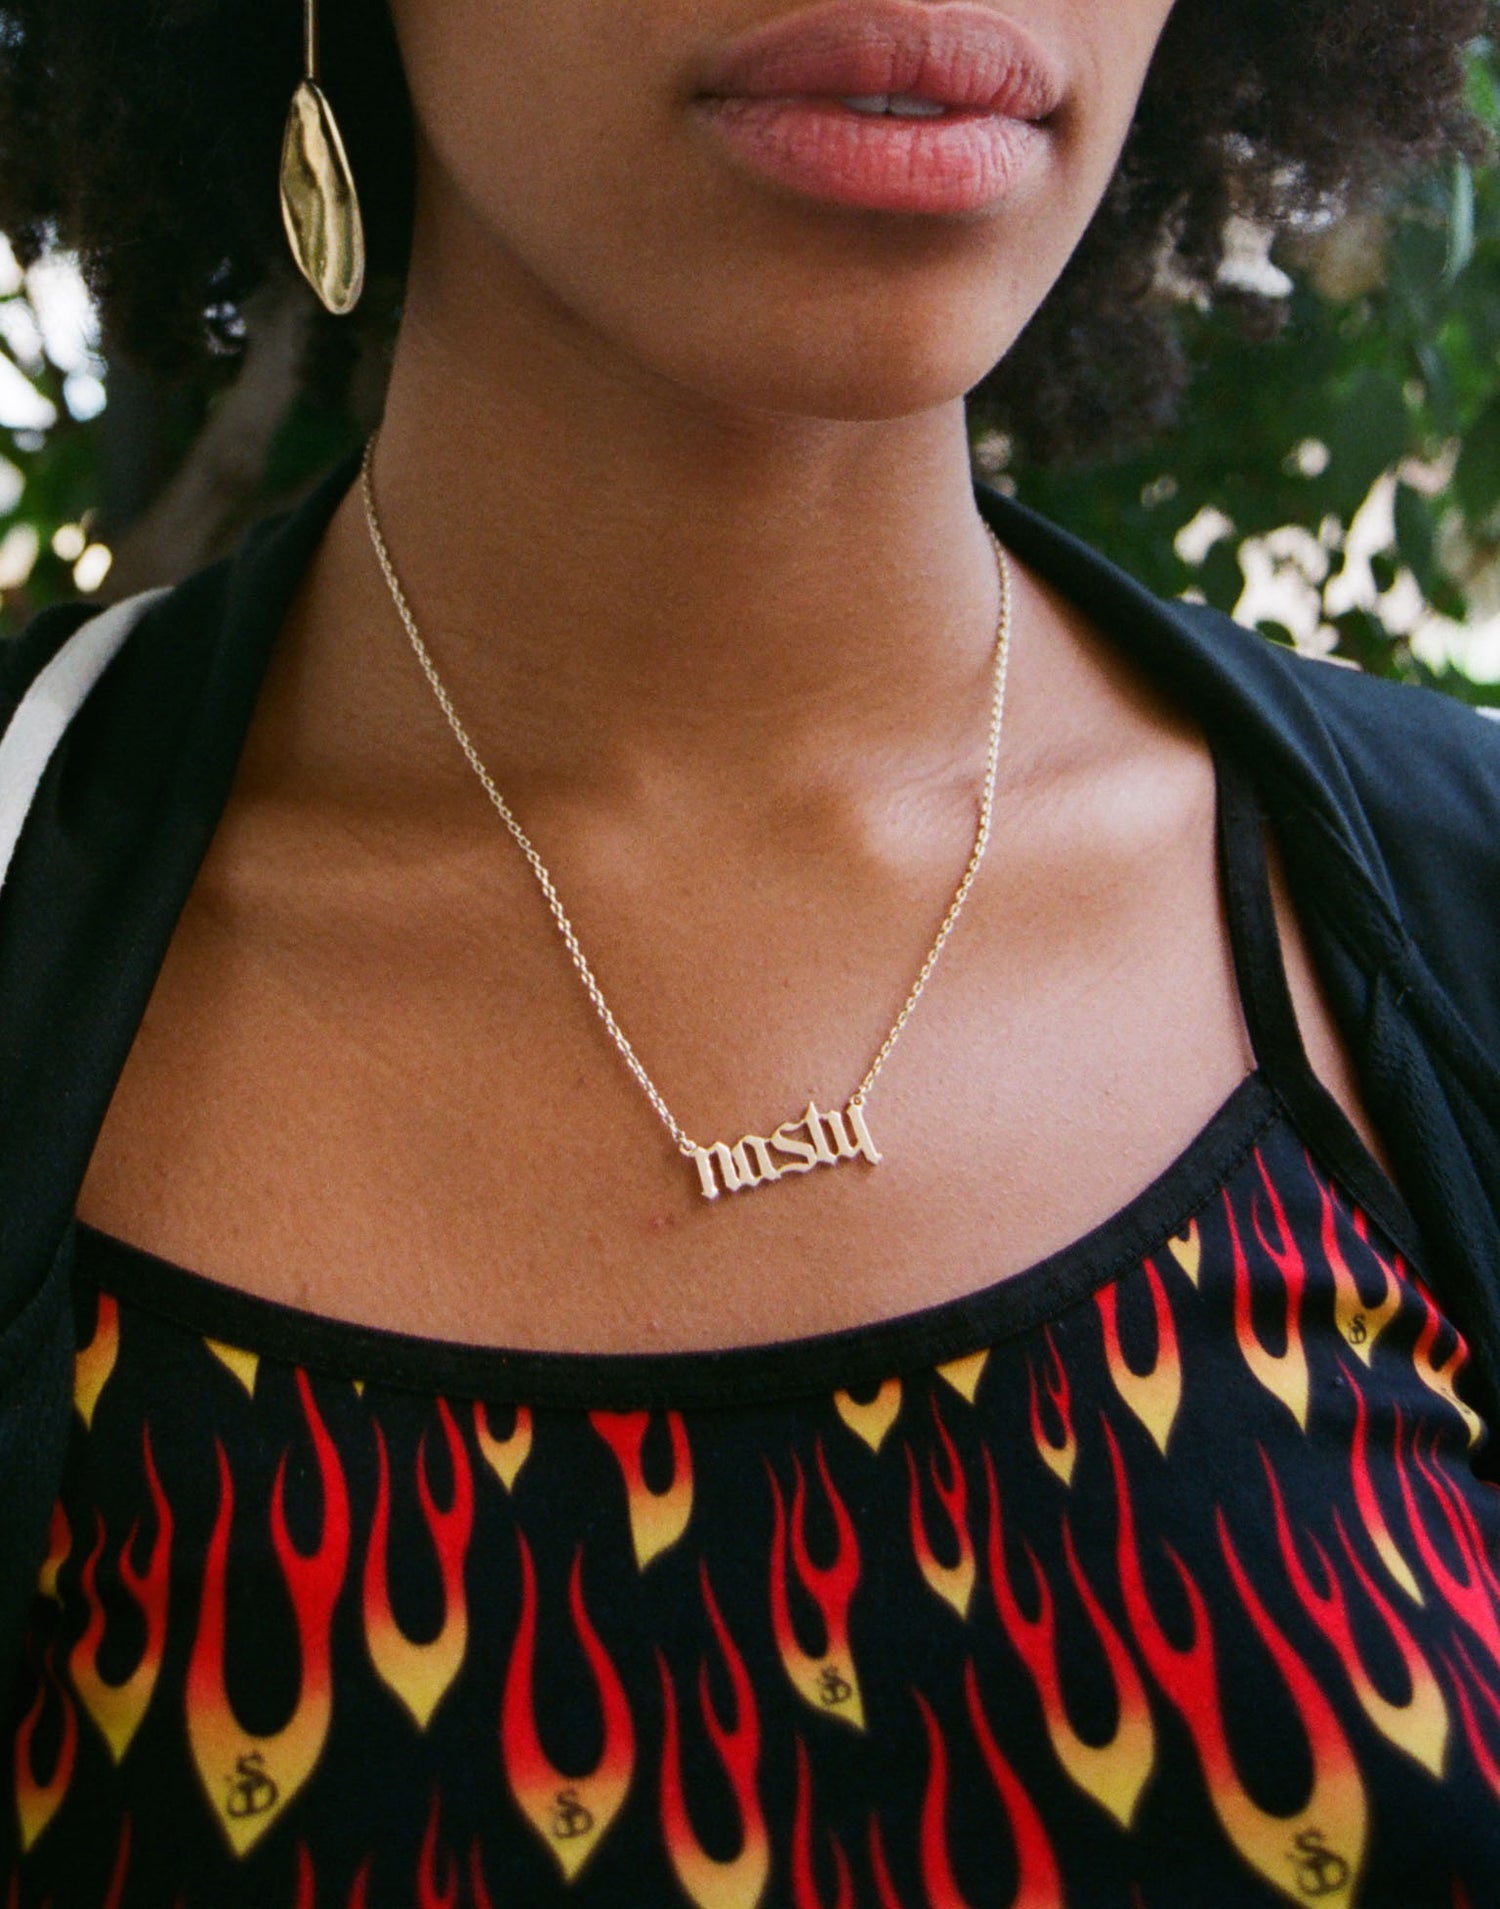 Nasty Necklace - Bing Bang Jewelry NYC